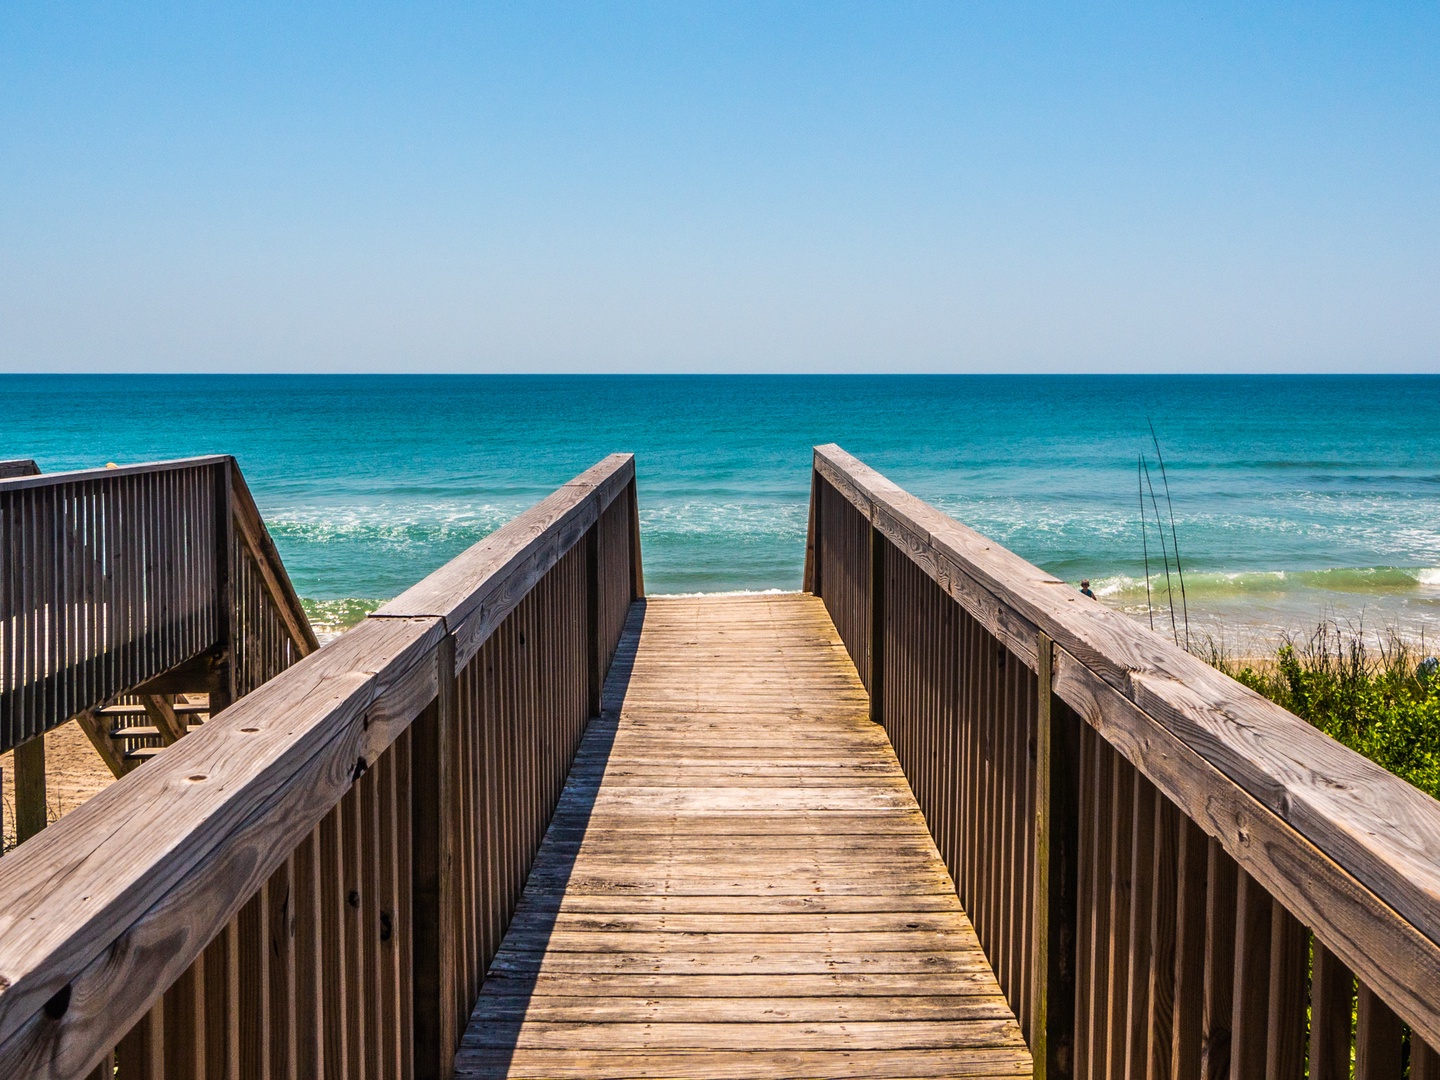 34 Q36-large-2000px - walkway to beach